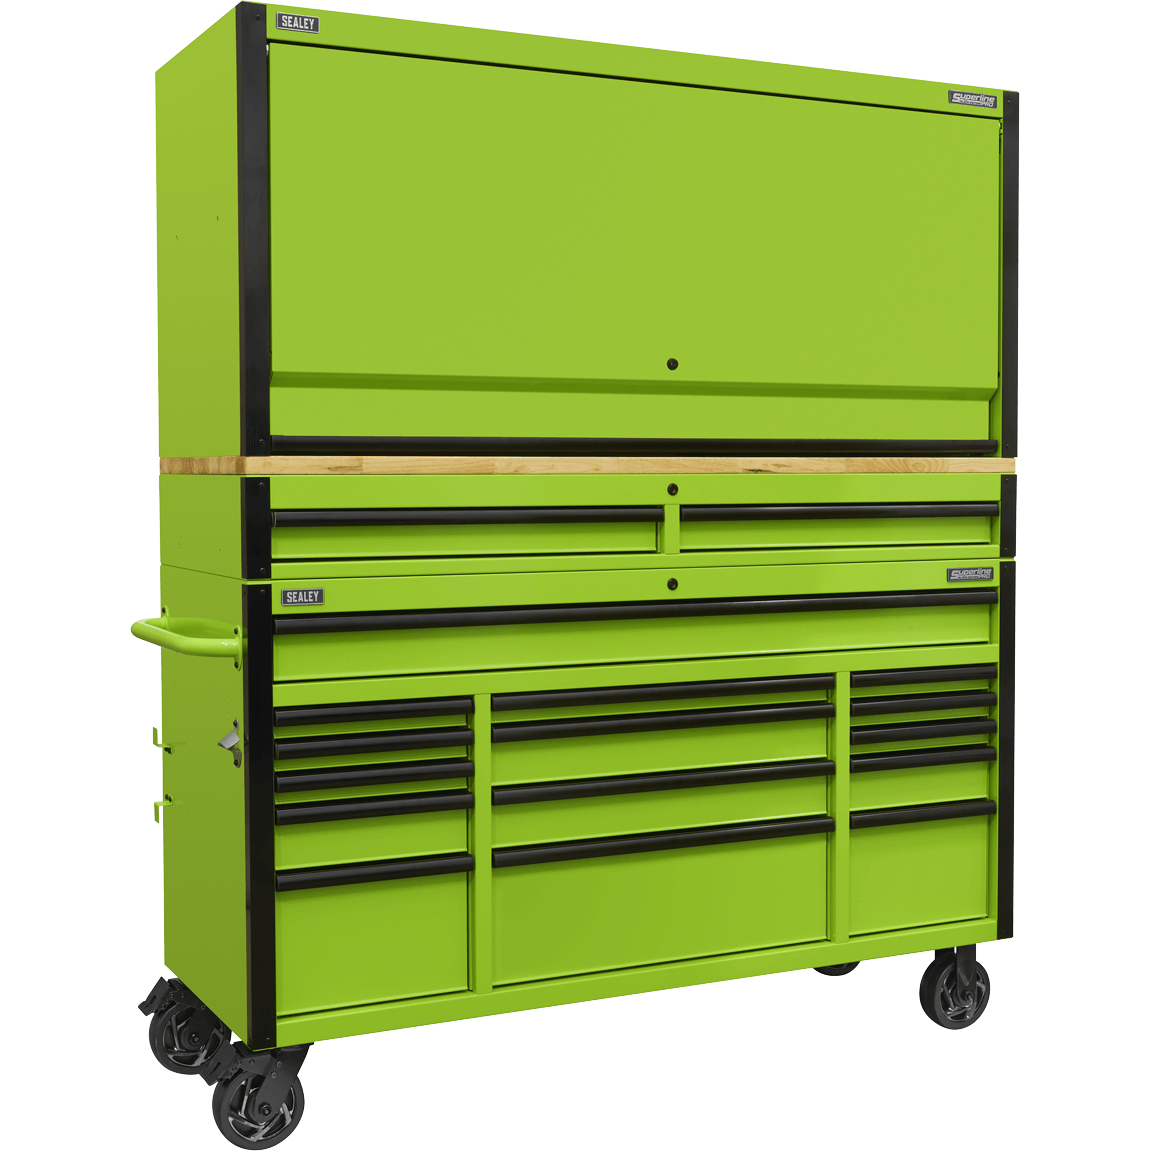 Sealey 15 Drawer Wooden Worktop Trolley and Hutch Combo Green